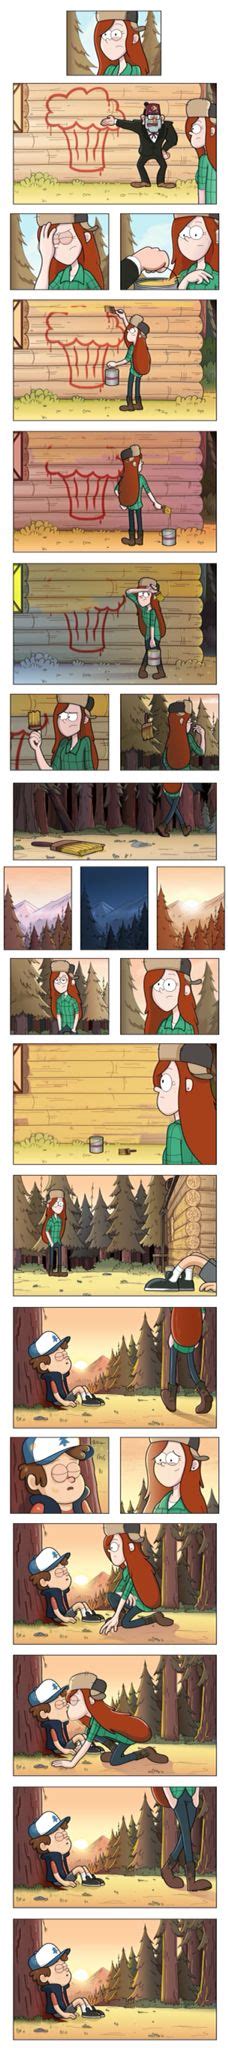 93 Best Gf Images Drawings Caricatures Gravity Falls